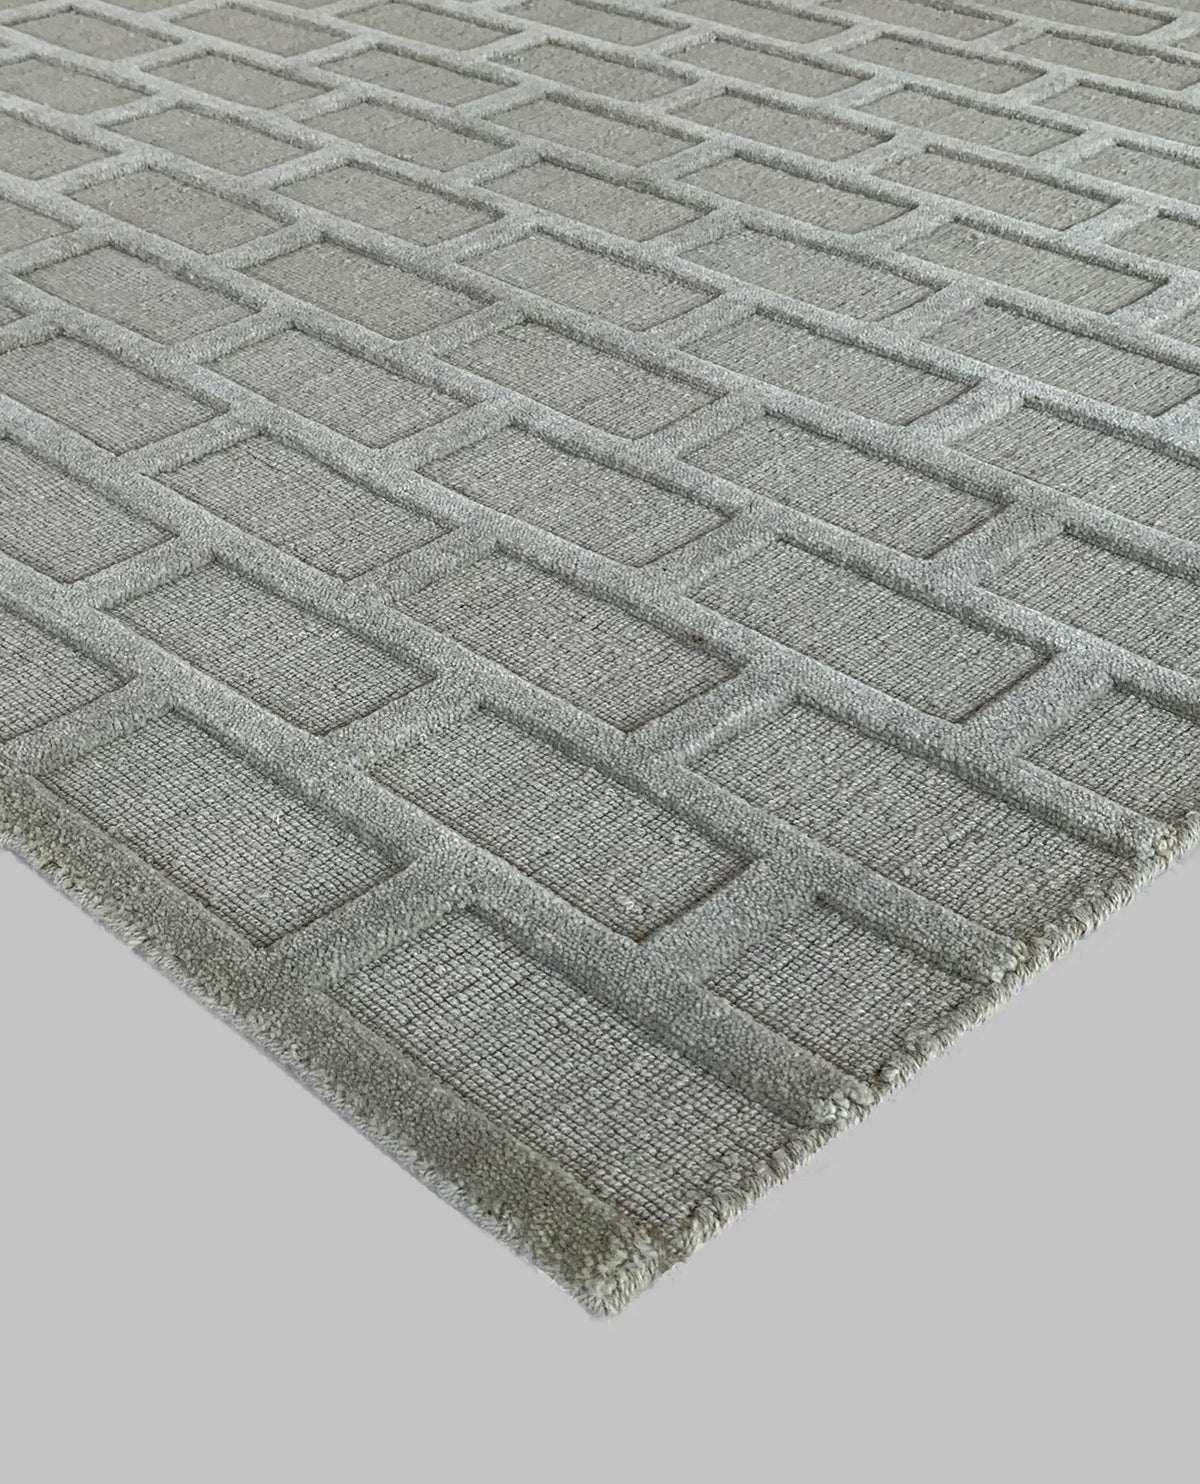 Rugslane Plain Textured Wool and Viscose Mix Textured Box Design Silver High Low Carpet 5ft X 7ft